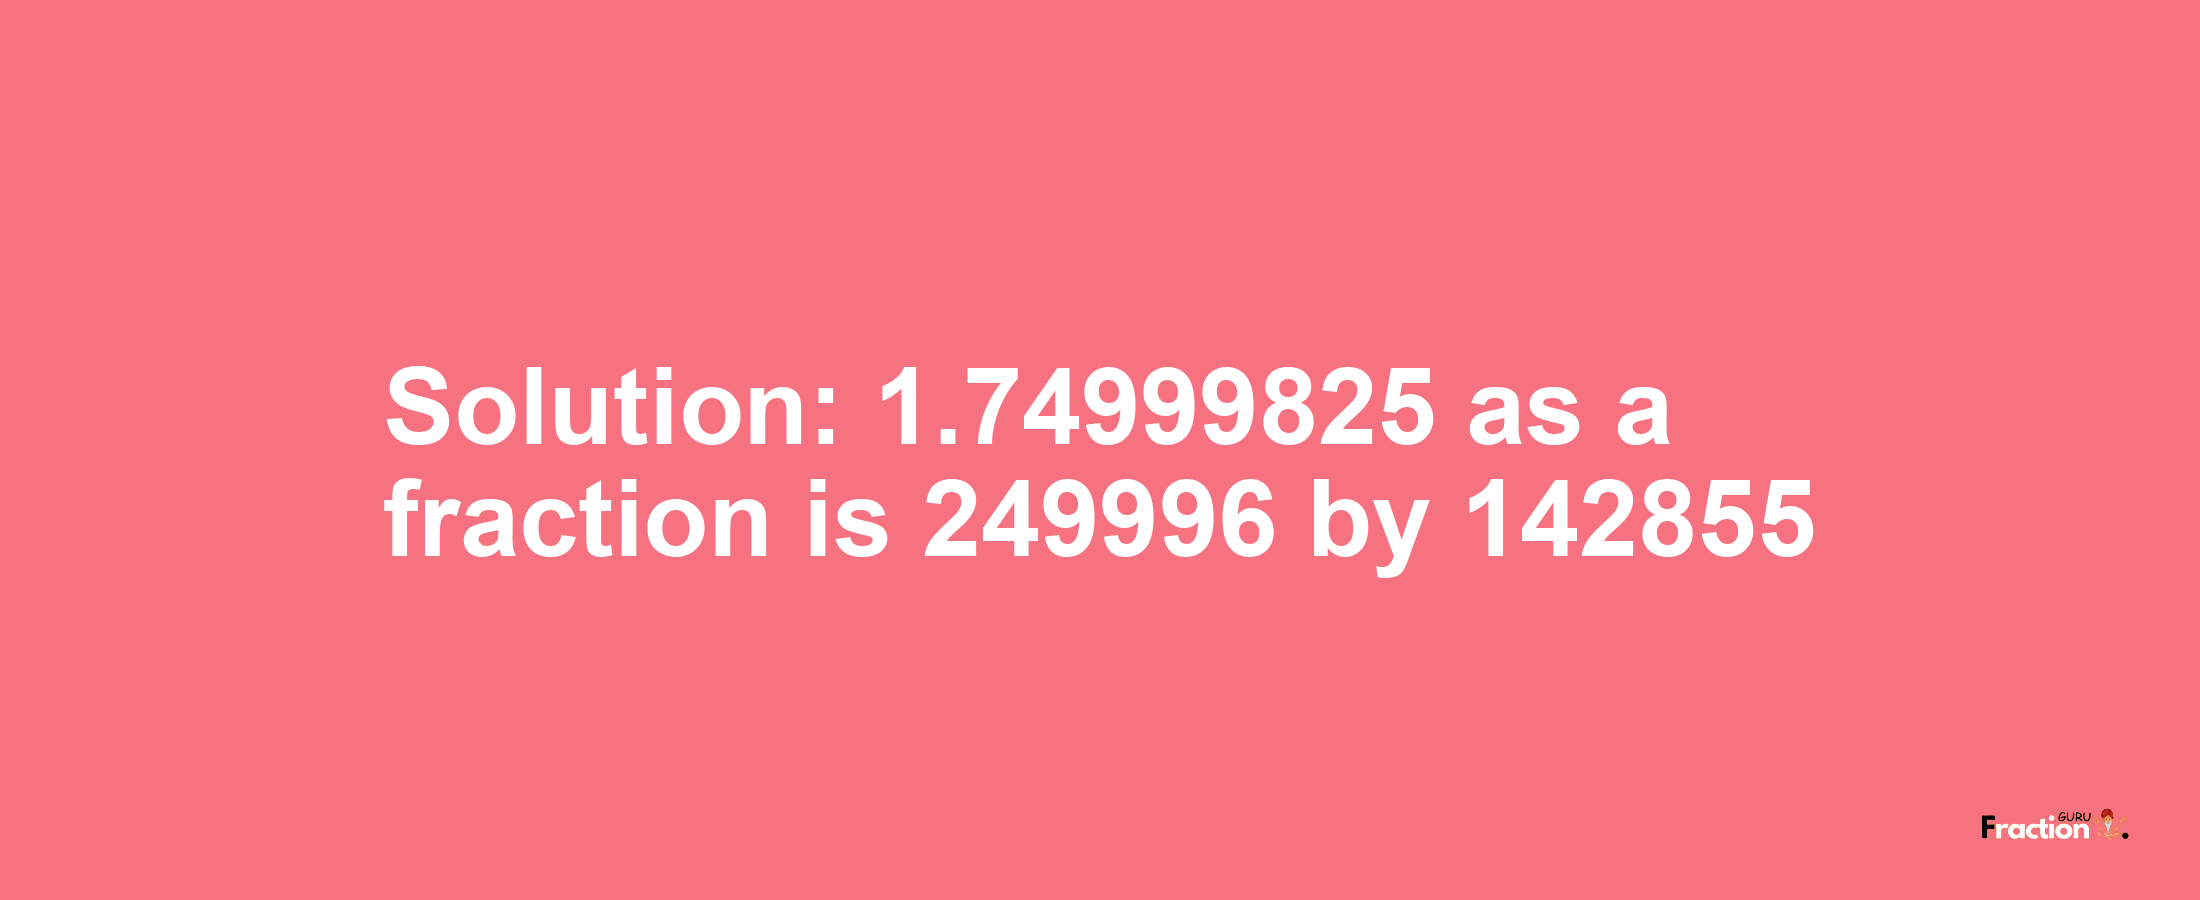 Solution:1.74999825 as a fraction is 249996/142855